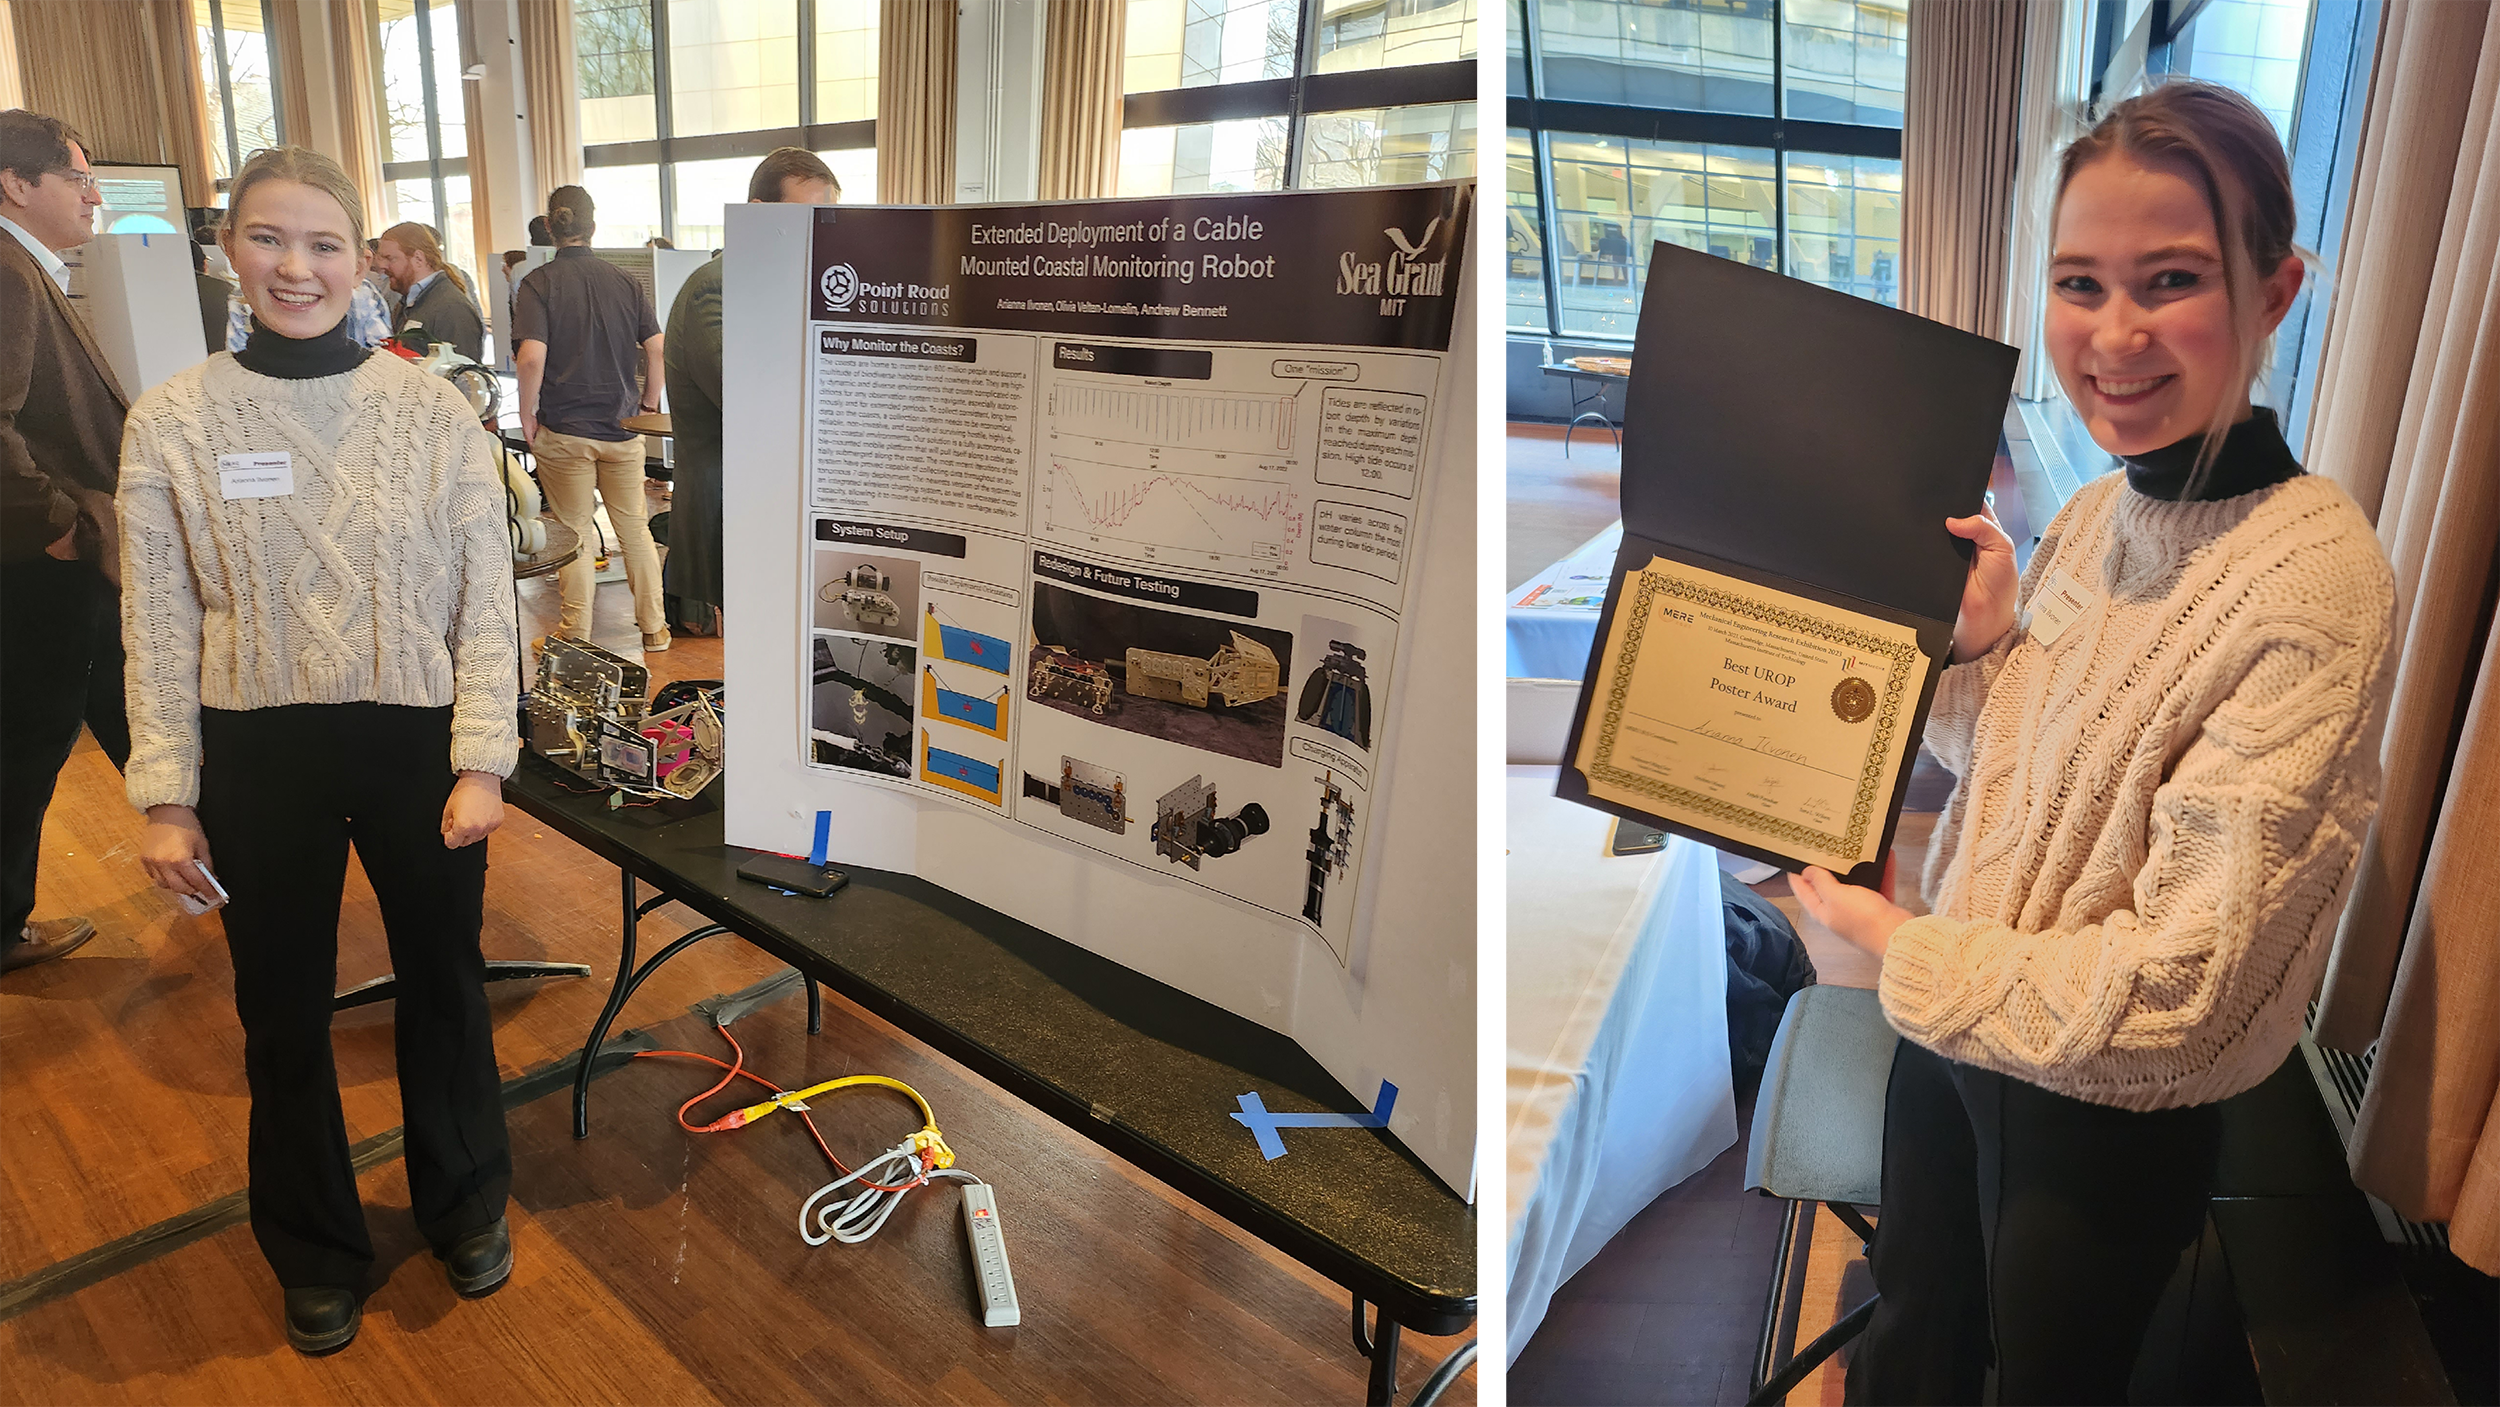 Arianna Ilvonen stands next to her research poster, and holds her winning poster certificate at the MIT Mechanical Engineering Research Exhibition.